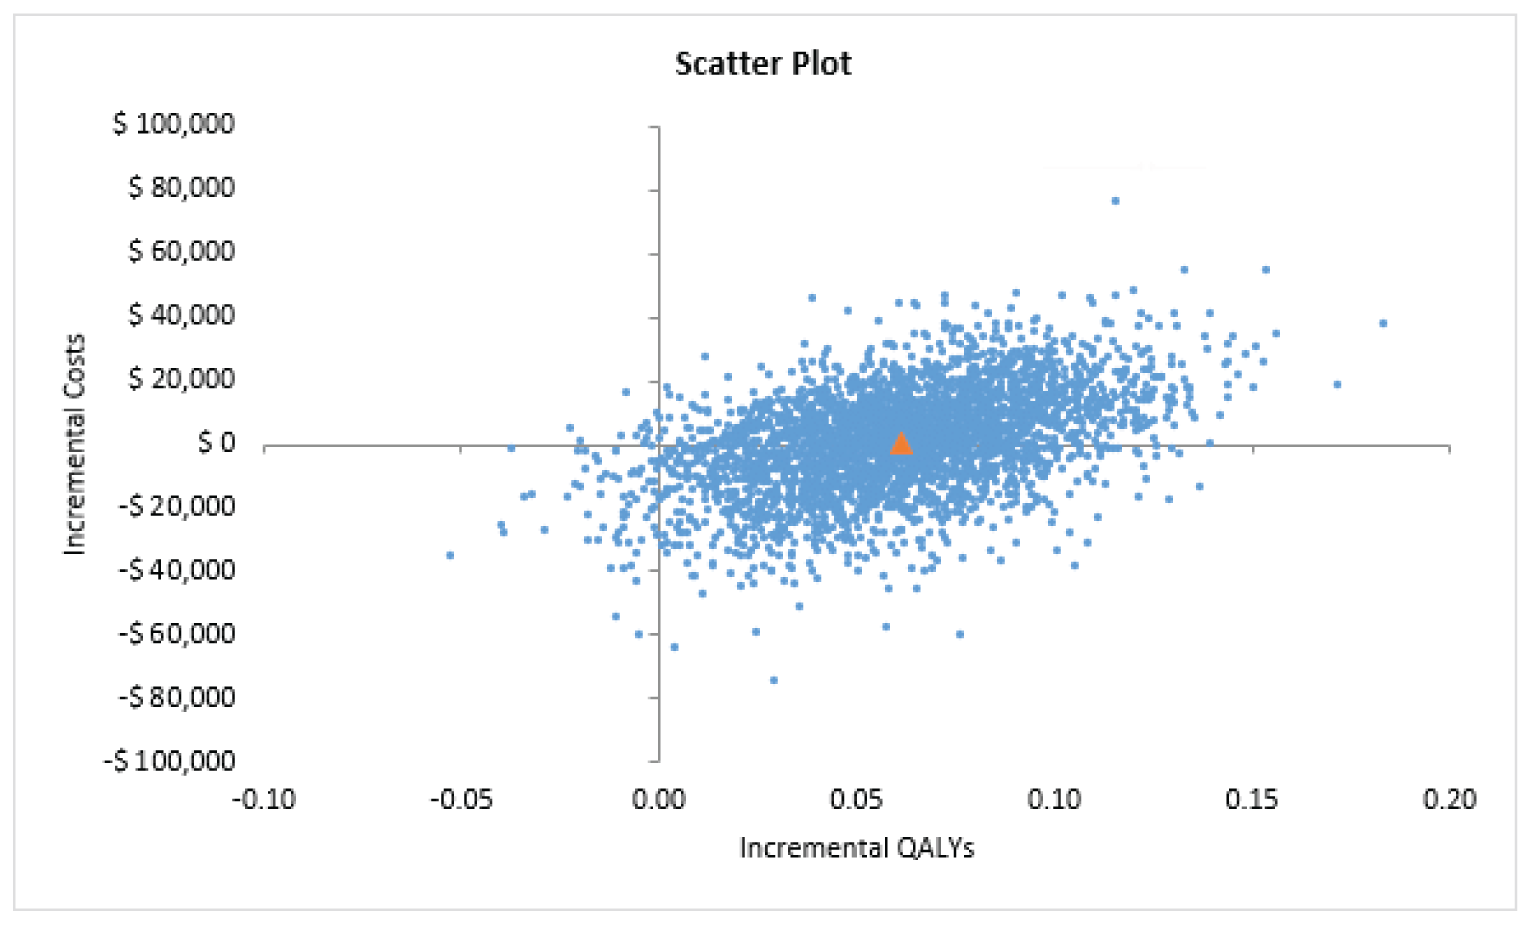 Scatterplot showing the resultant incremental cost and incremental quality-adjusted life-years for each of the simulated probabilistic iterations. Where the Y axis represents incremental cost ranging from -$100,000 to $100,000 and the X axis of incremental quality-adjusted life-years ranging from -0.10 to 0.20 quality-adjusted life-years. The majority of iterations fall between the more costly and more effective quadrant, and the less costly and more effective quadrant.